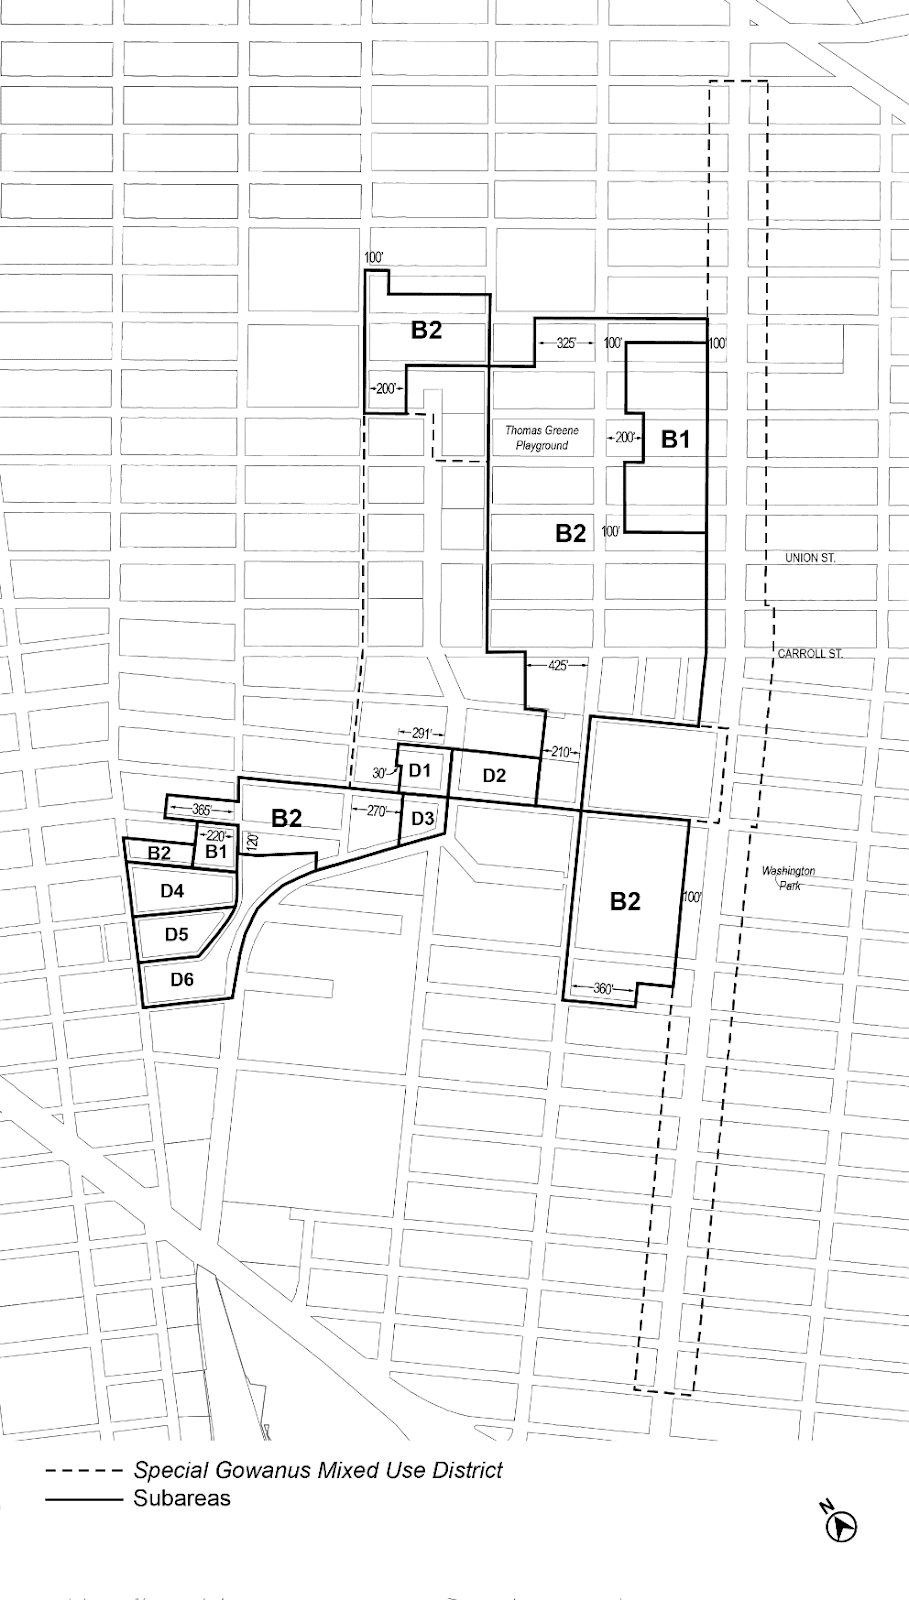 Zoning Resolutions Chapter 9: Special Gowanus Mixed Use District APPENDIX A.1